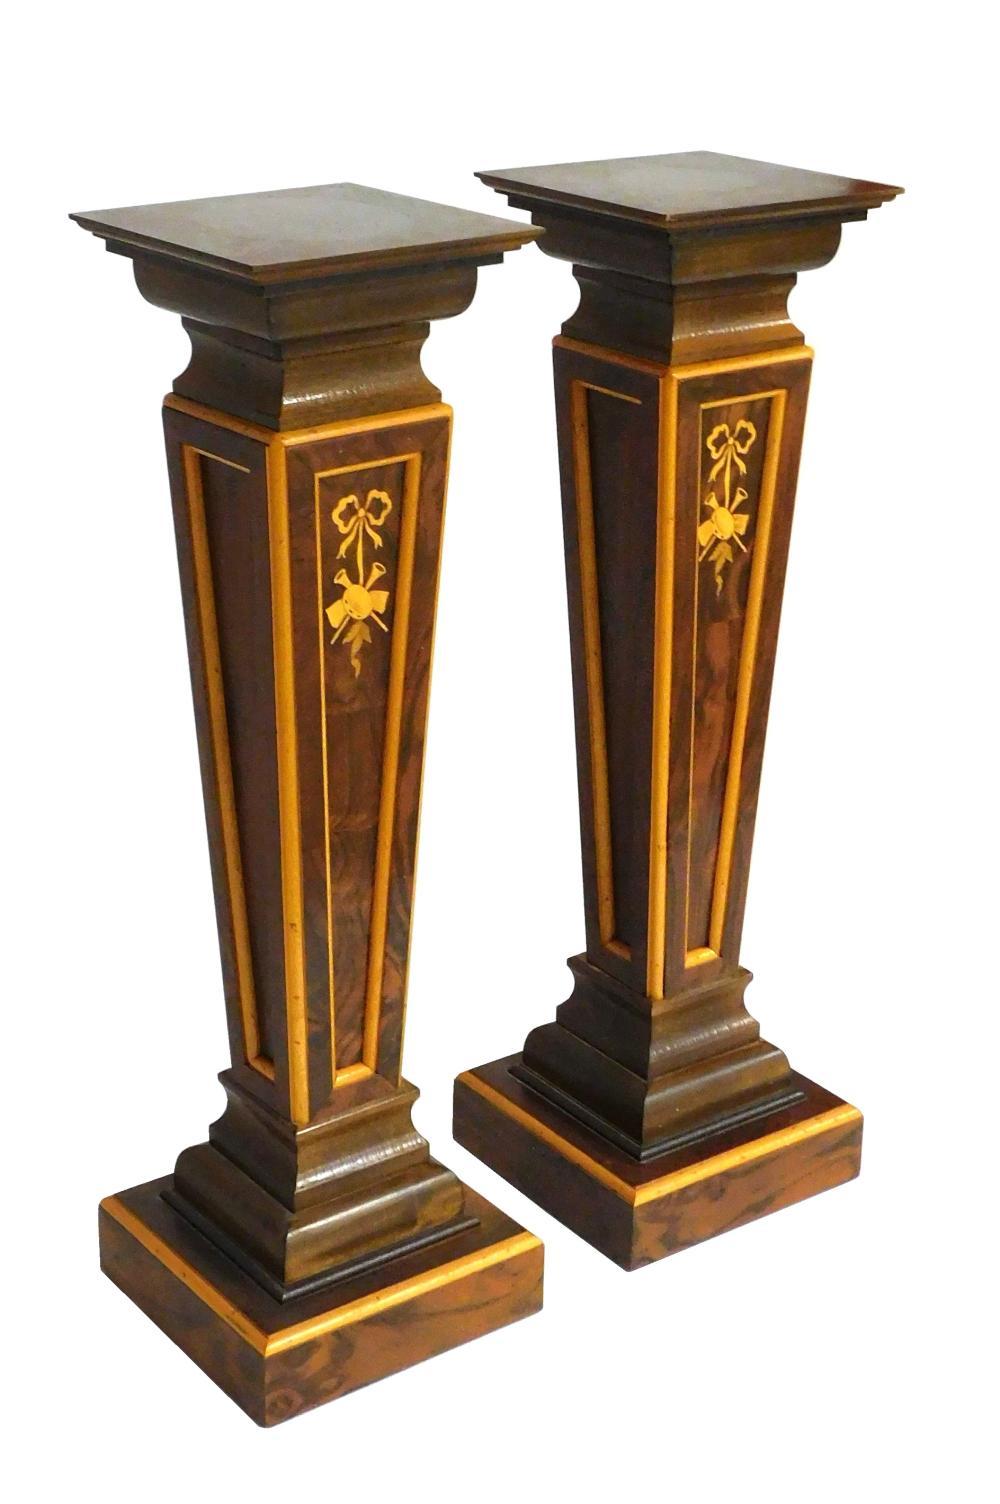 Elevate your space with this stunning Pair of Continental Inlaid Display Pedestals, crafted in the mid-20th century. Each pedestal features a square top adorned with exquisite burl wood, adding richness and depth to its appearance. The elegant